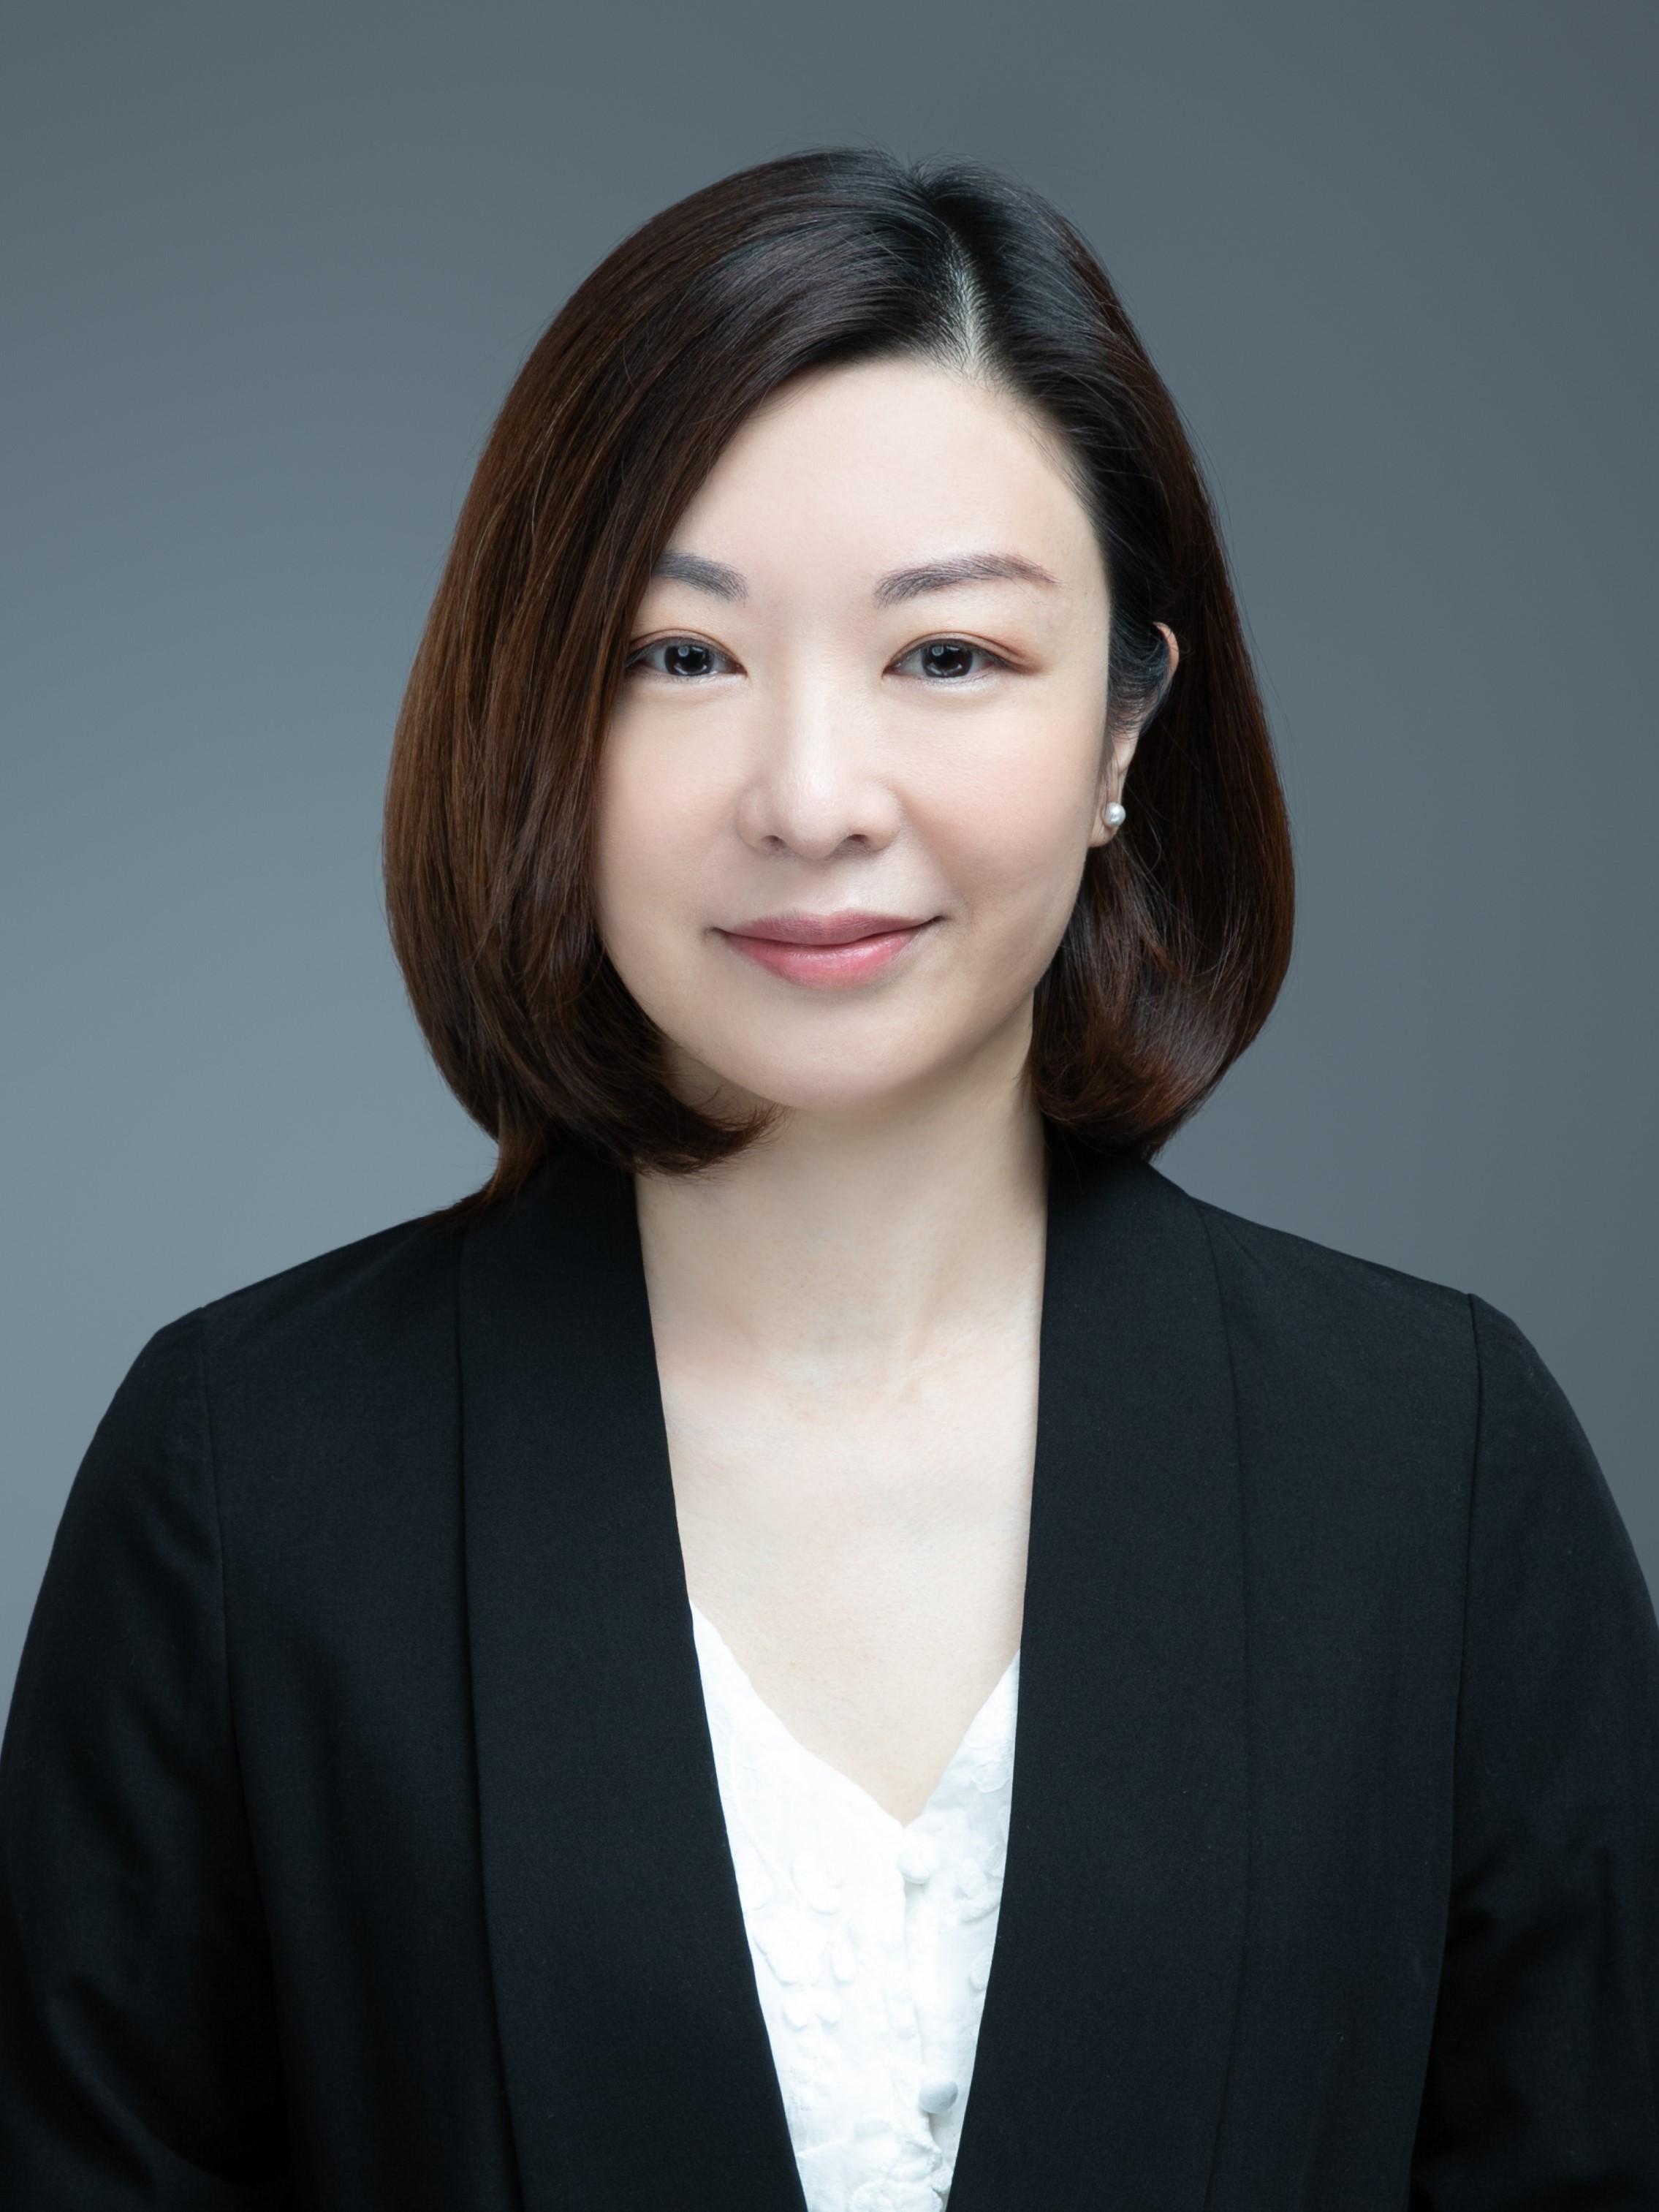 The Hospital Authority announced today (February 29) that Dr Gladys Kwan will be appointed as the Hospital Chief Executive of Caritas Medical Centre with effect from July 15, 2024.